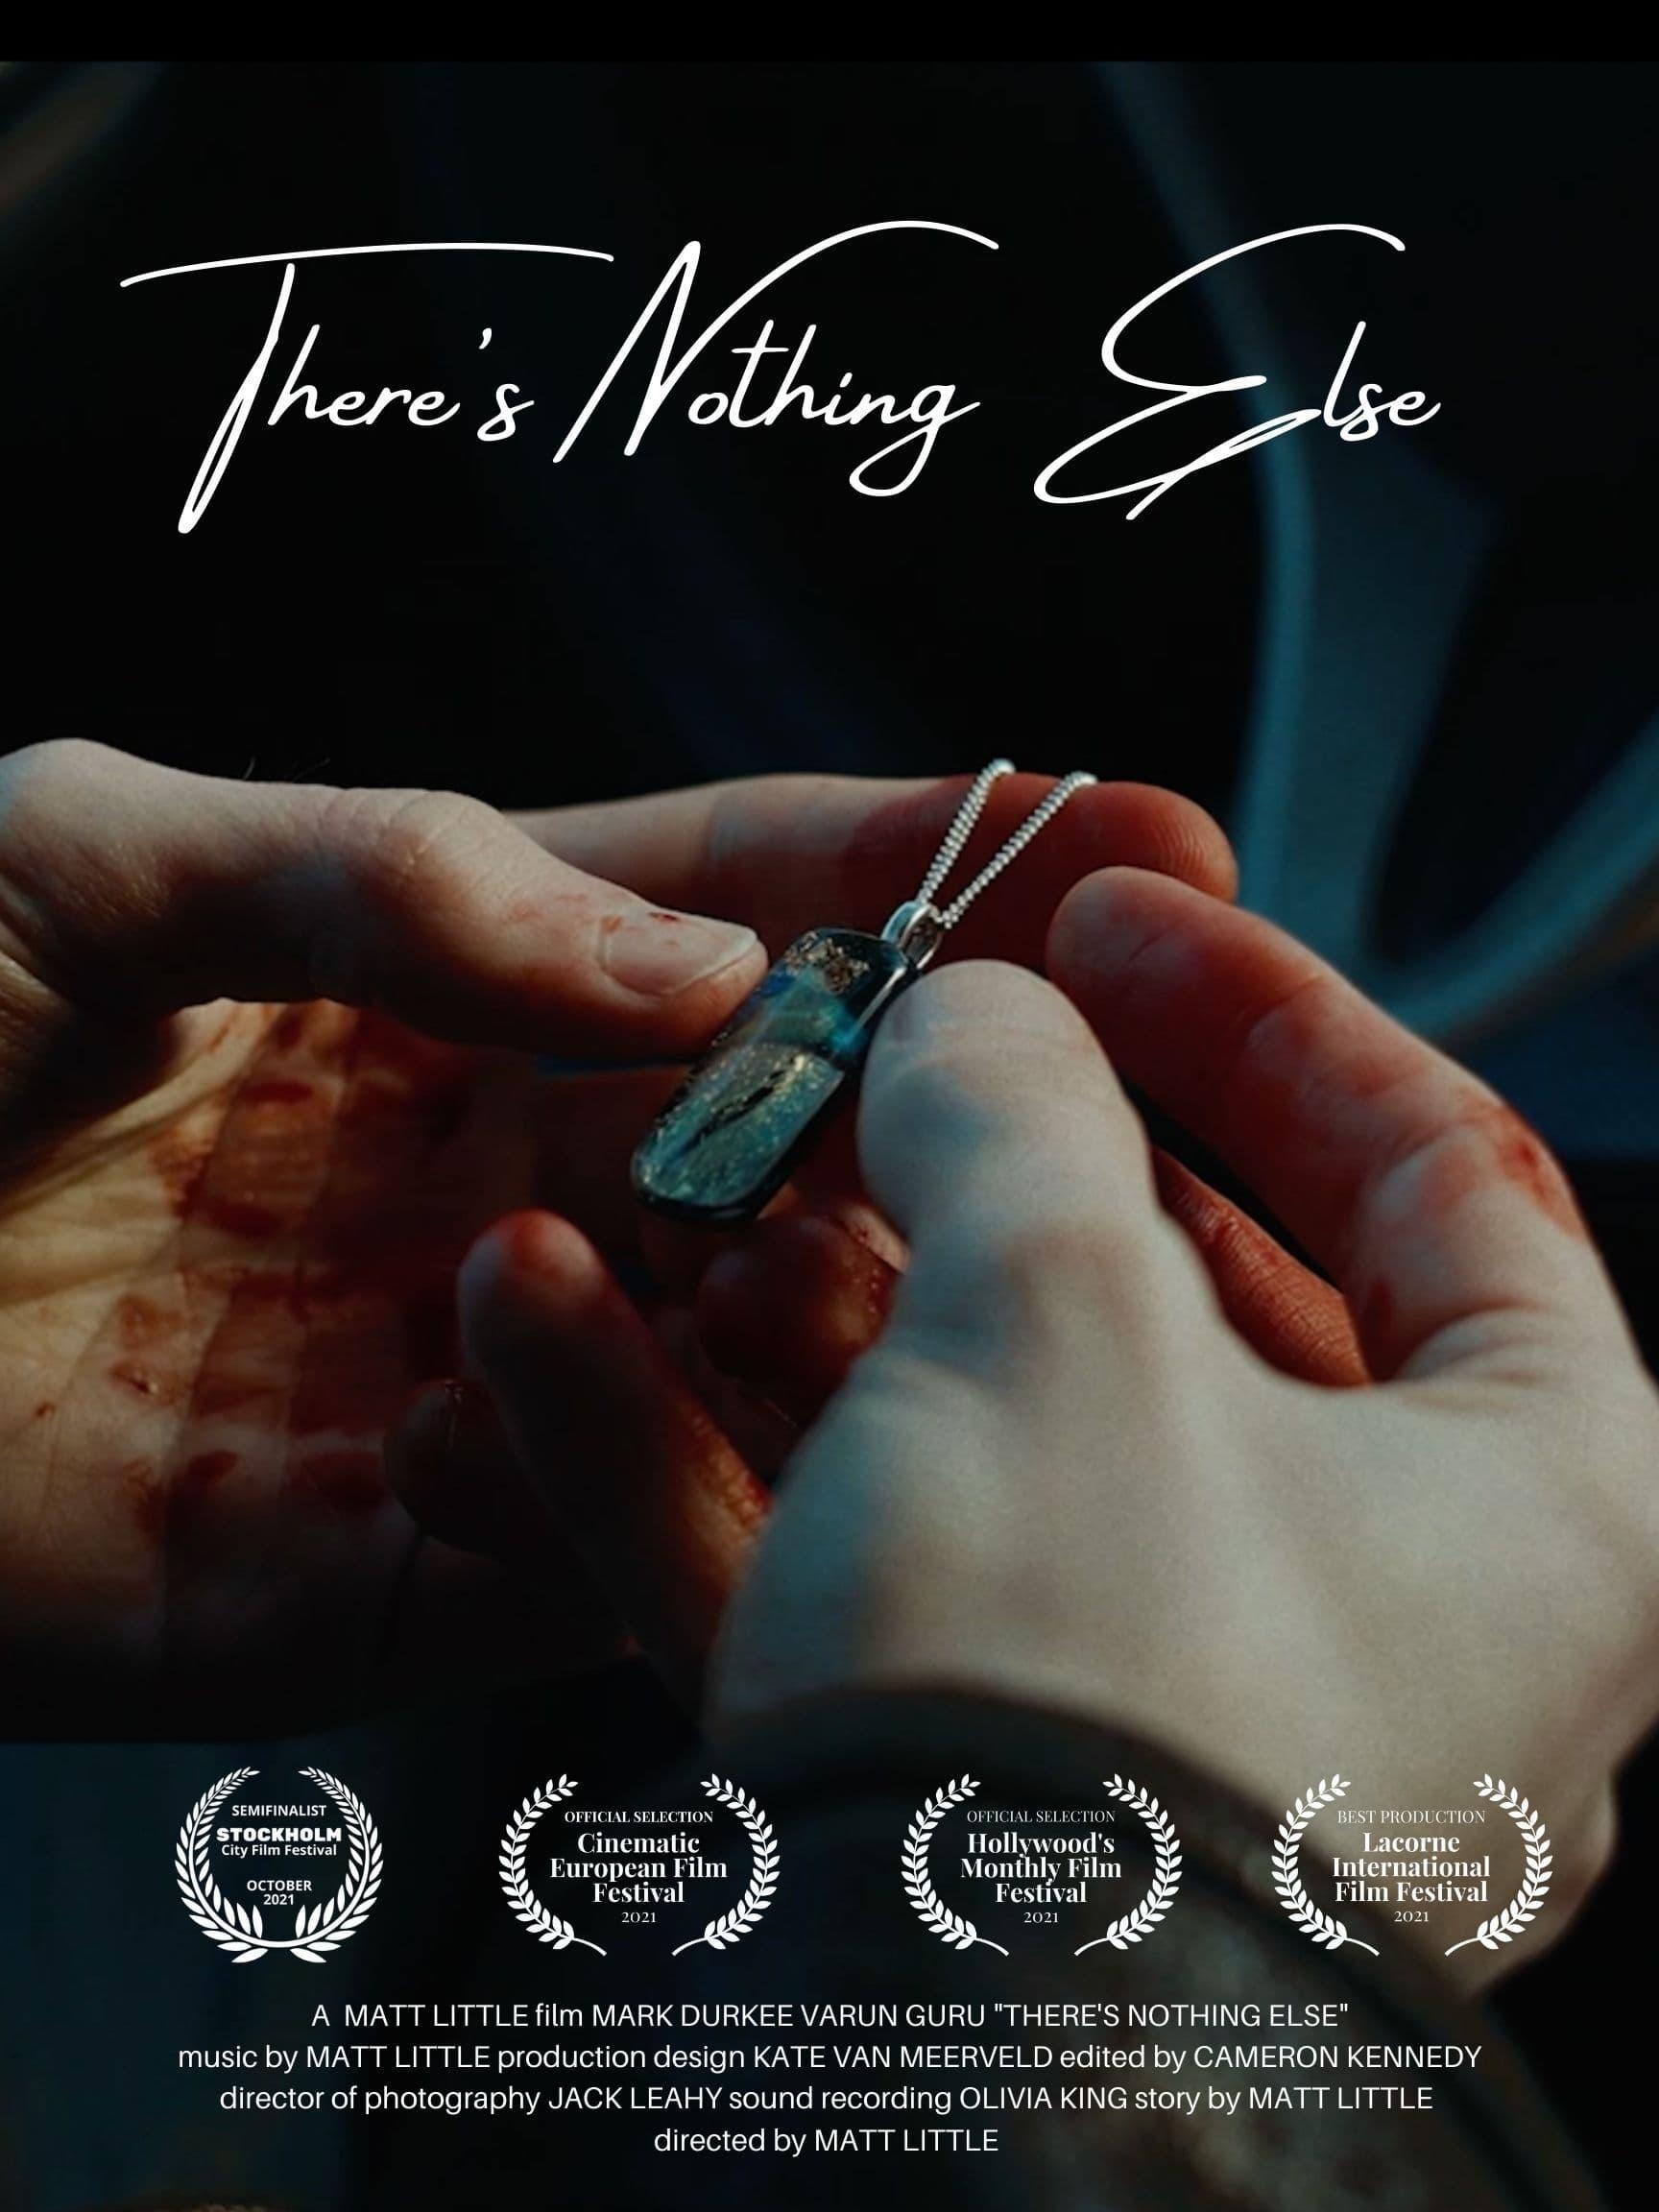 There's Nothing Else poster